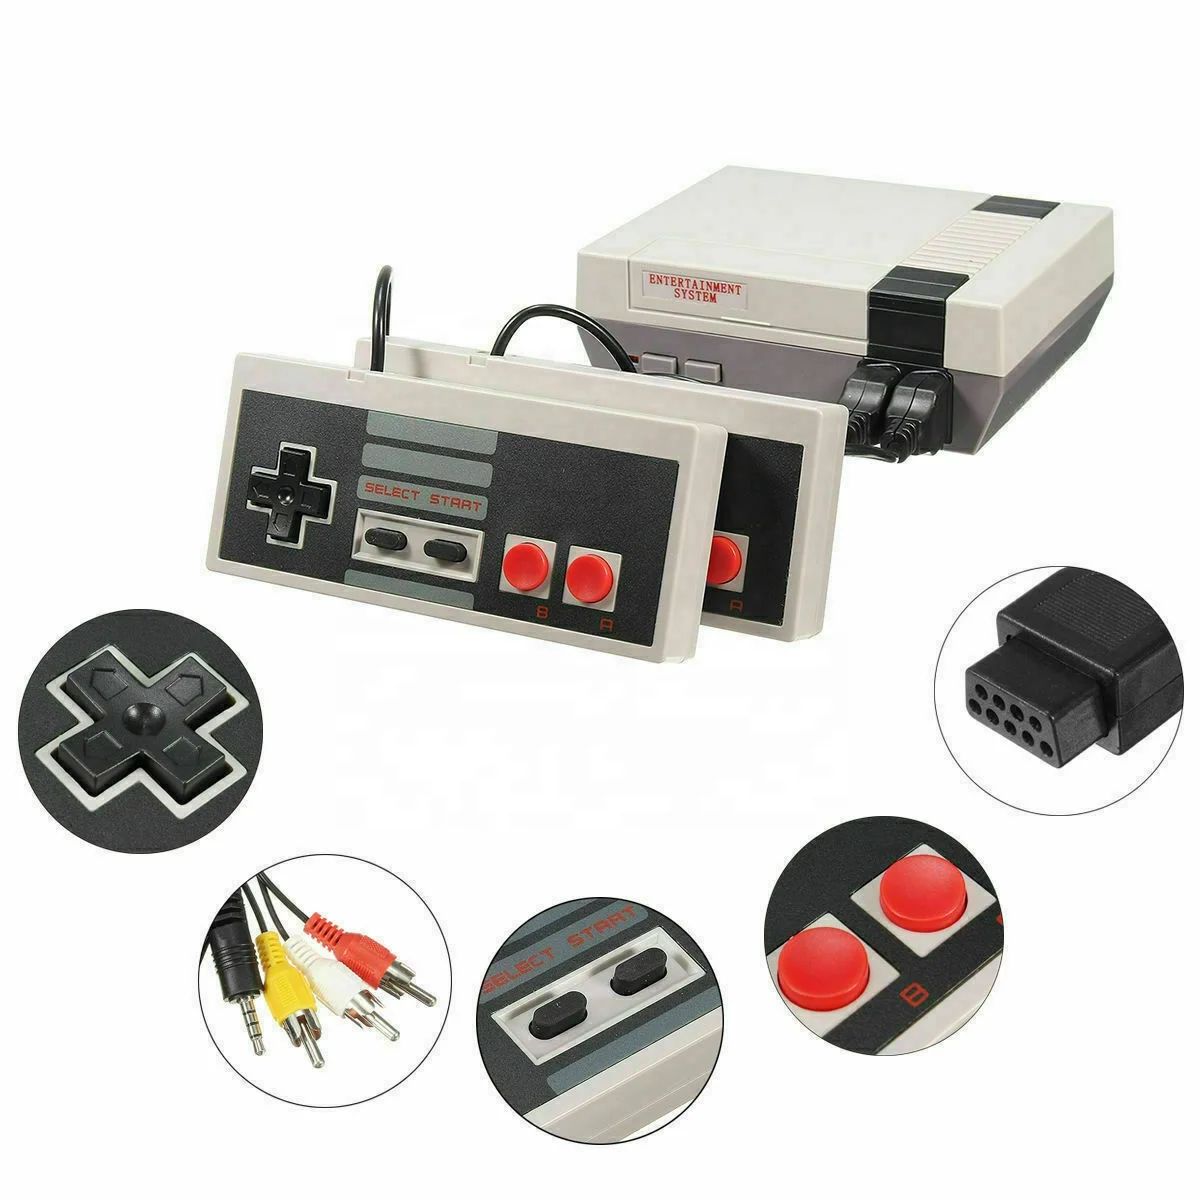 

Mini Retro Classic Childhood 620 Games Built-in 8-bit TV connecting video Game Console with 2 Controllers